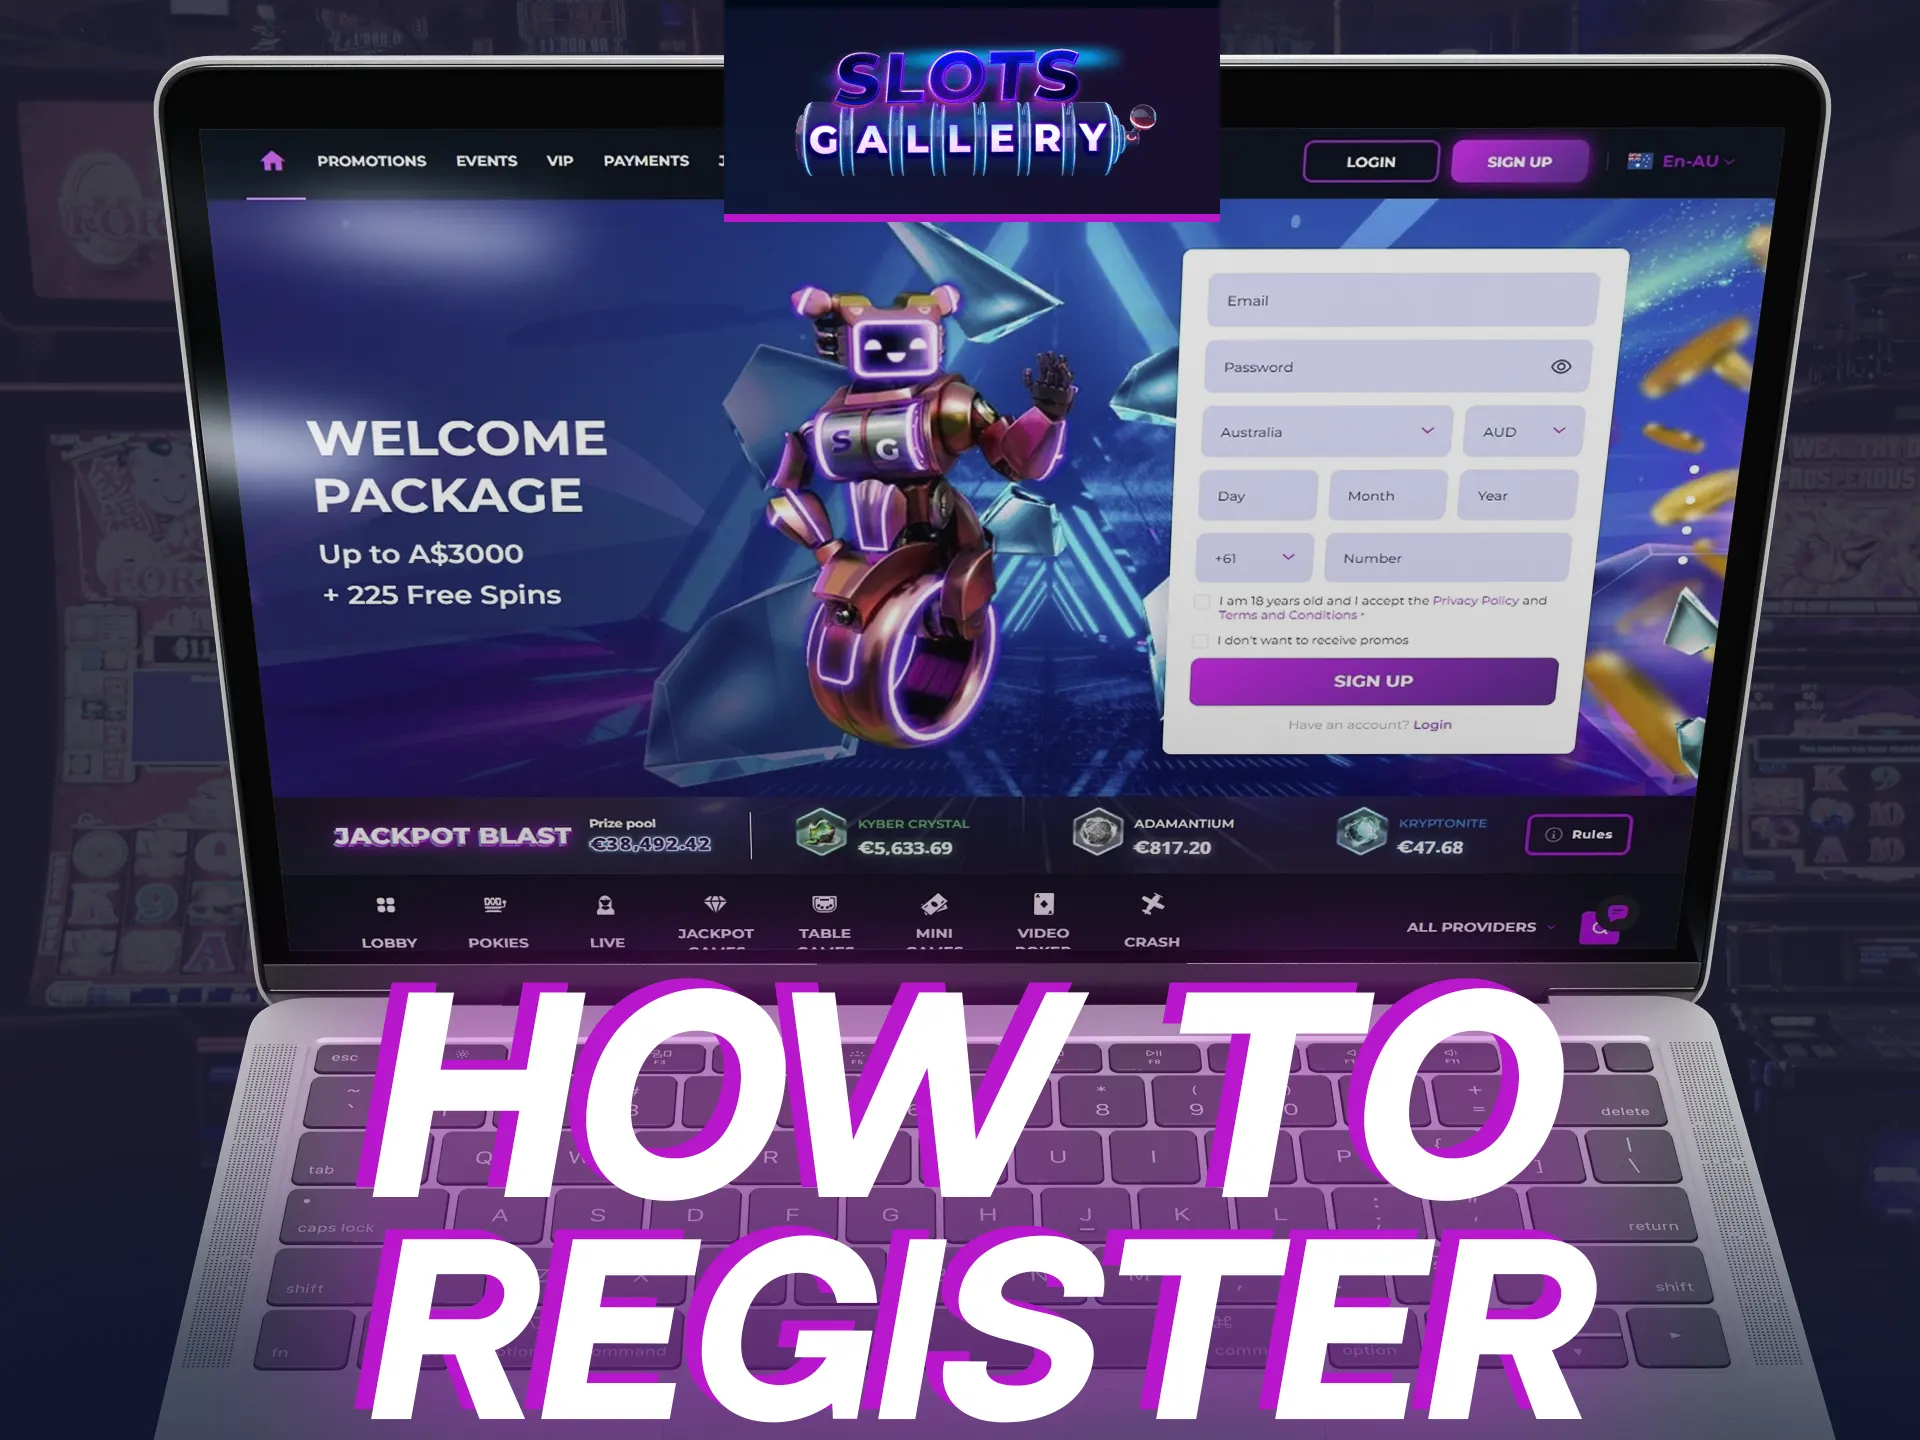 Check the instruction how you can register at Slots Gallery.